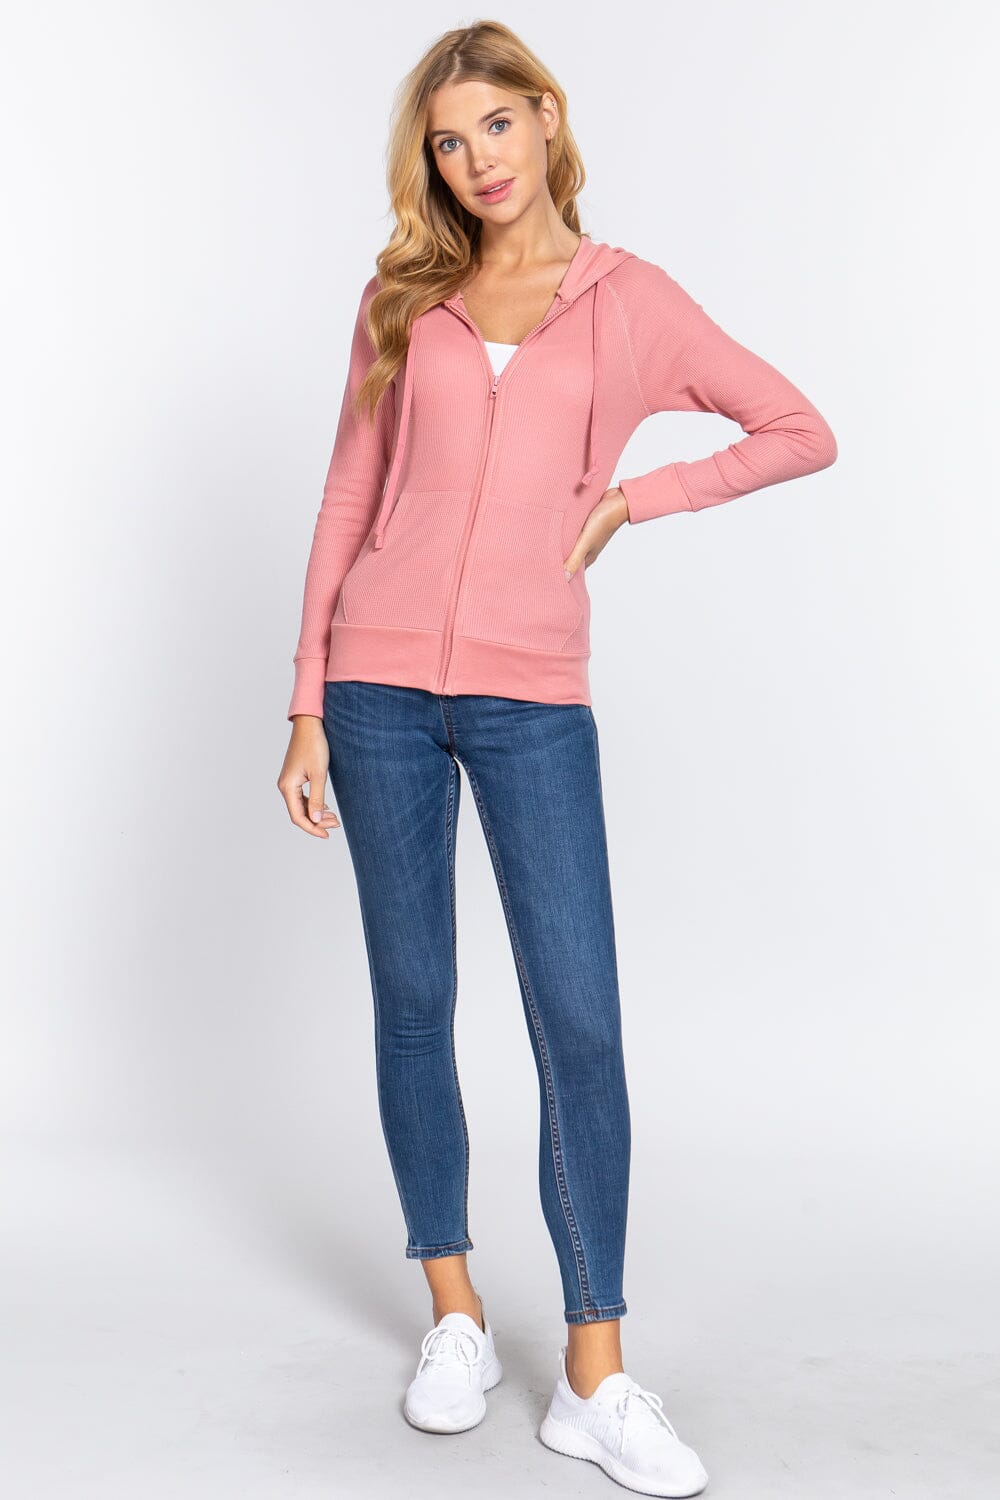 Soft Pink Thermal Long Sleeve Hoodie Zip Up Jacket jehouze 